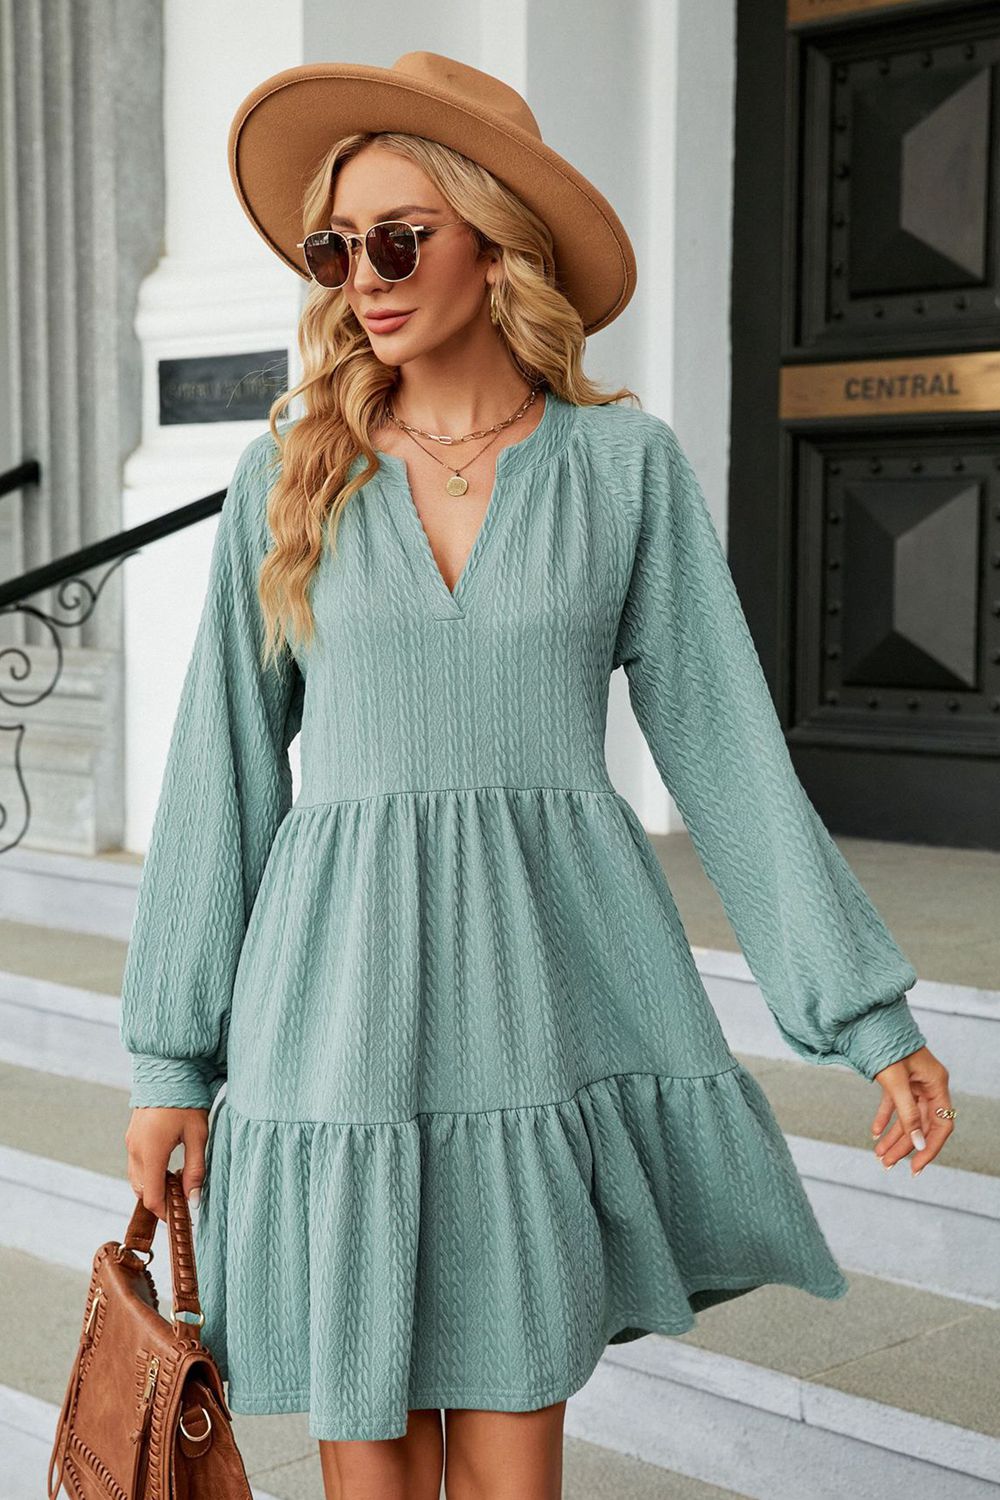 Notched Neck Long Sleeve Mini Dress - Tophatter Deals and Online Shopping - Electronics, Jewelry, Beauty, Health, Gadgets, Fashion - Tophatter's Discounts & Offers - tophatters - tophatters.co